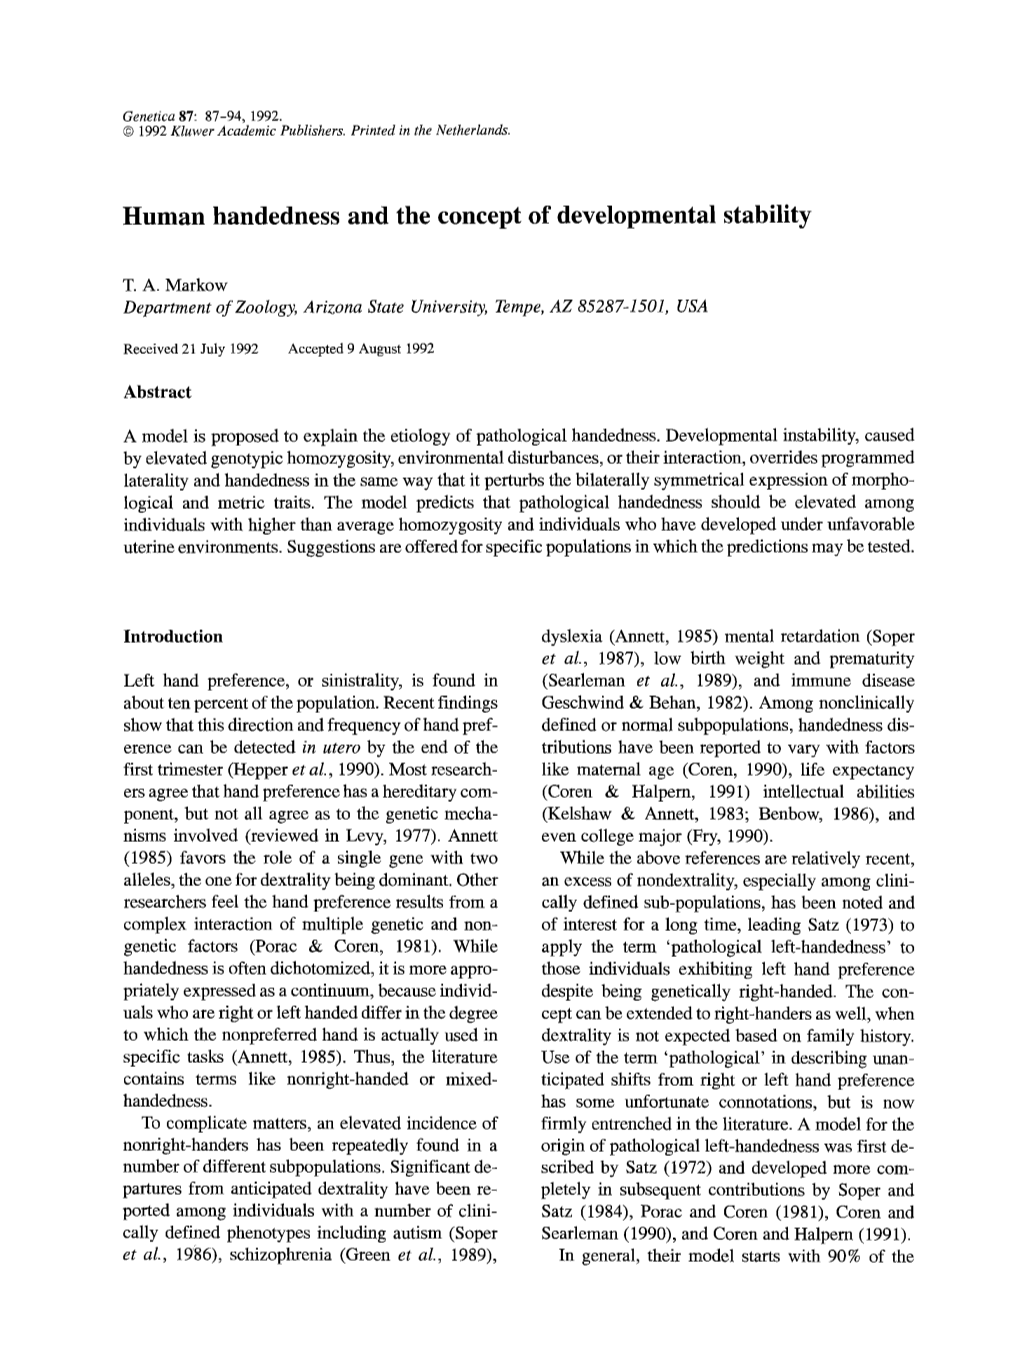 Human Handedness and the Concept of Developmental Stability